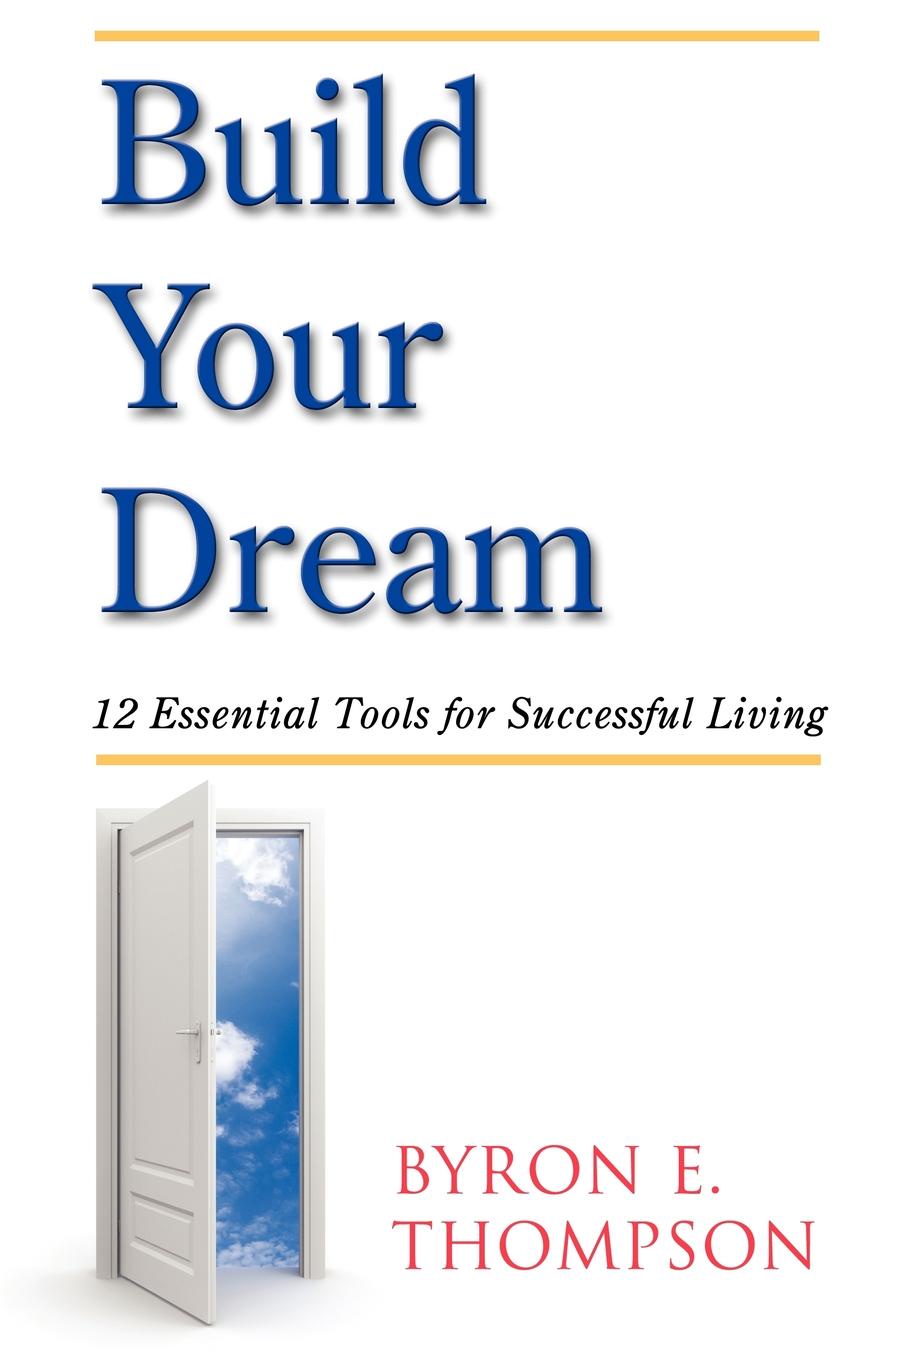 Build Your Dream. 12 Essential Tools for Successful Living